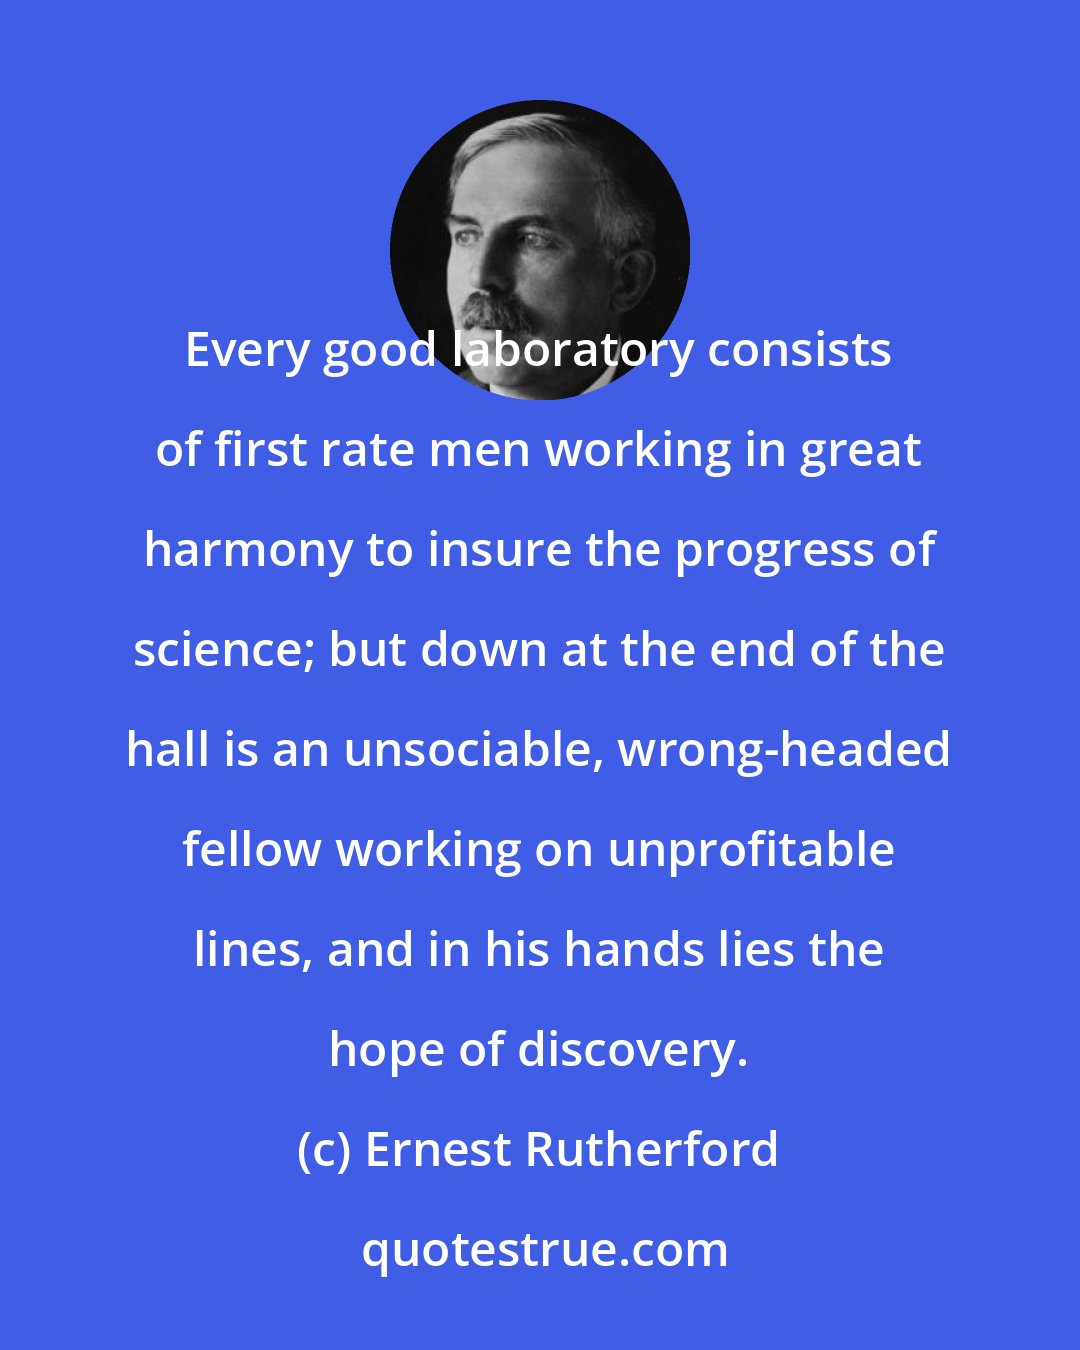 Ernest Rutherford: Every good laboratory consists of first rate men working in great harmony to insure the progress of science; but down at the end of the hall is an unsociable, wrong-headed fellow working on unprofitable lines, and in his hands lies the hope of discovery.